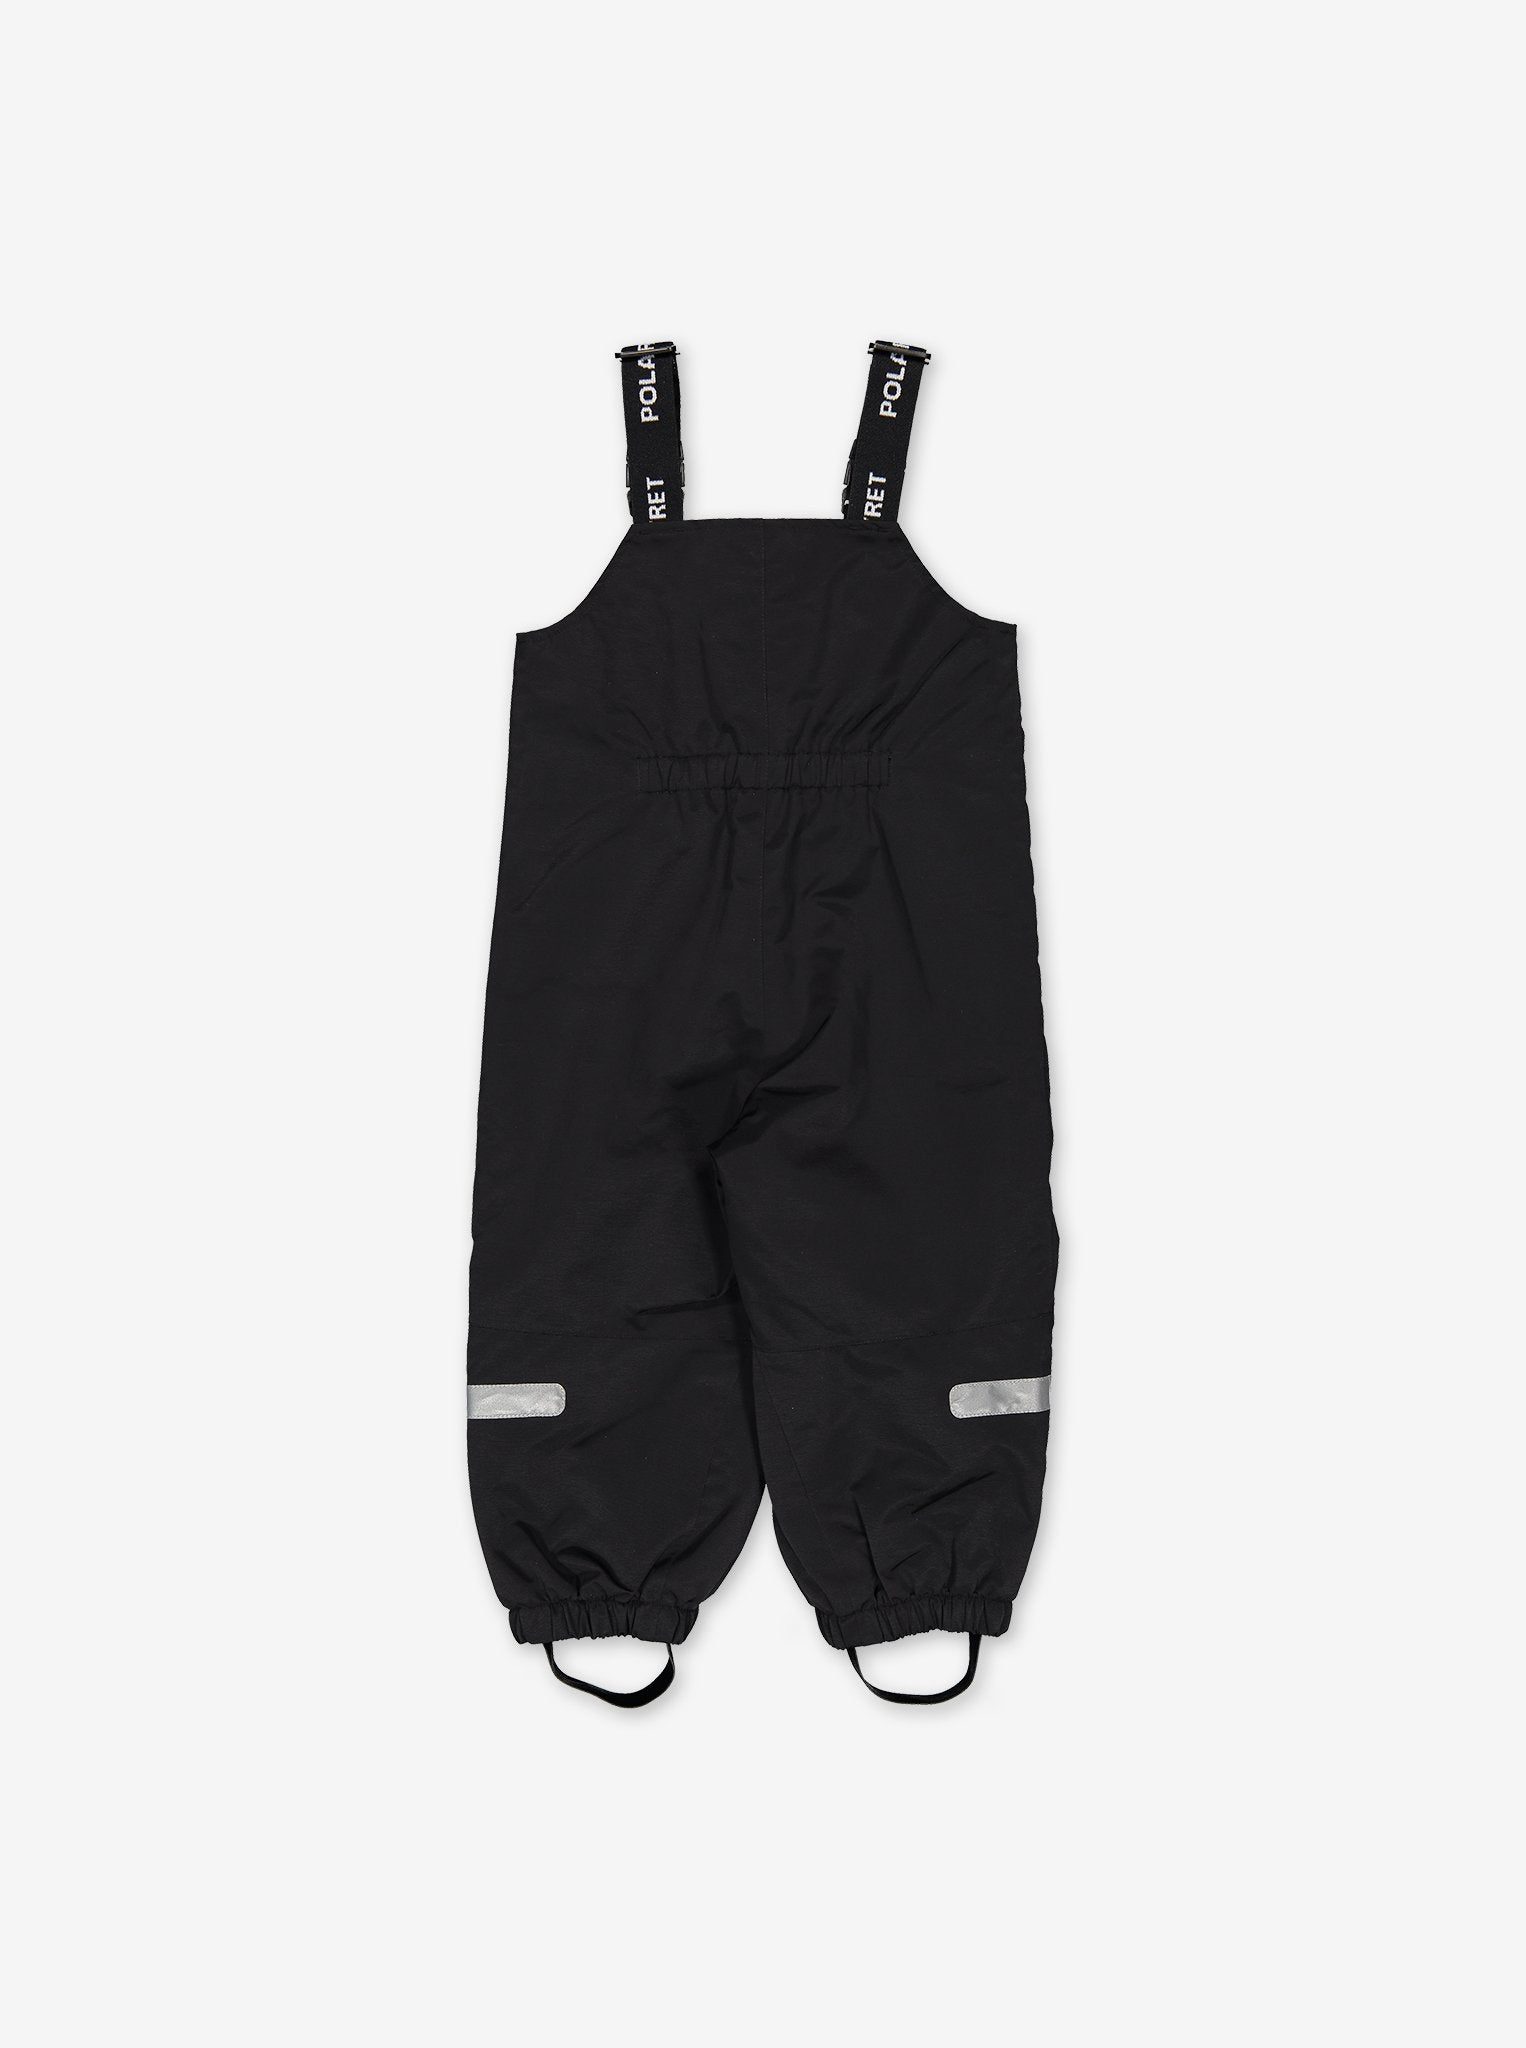 Kids waterproof black dungarees, ethical waterproof warm and comfortably high quality